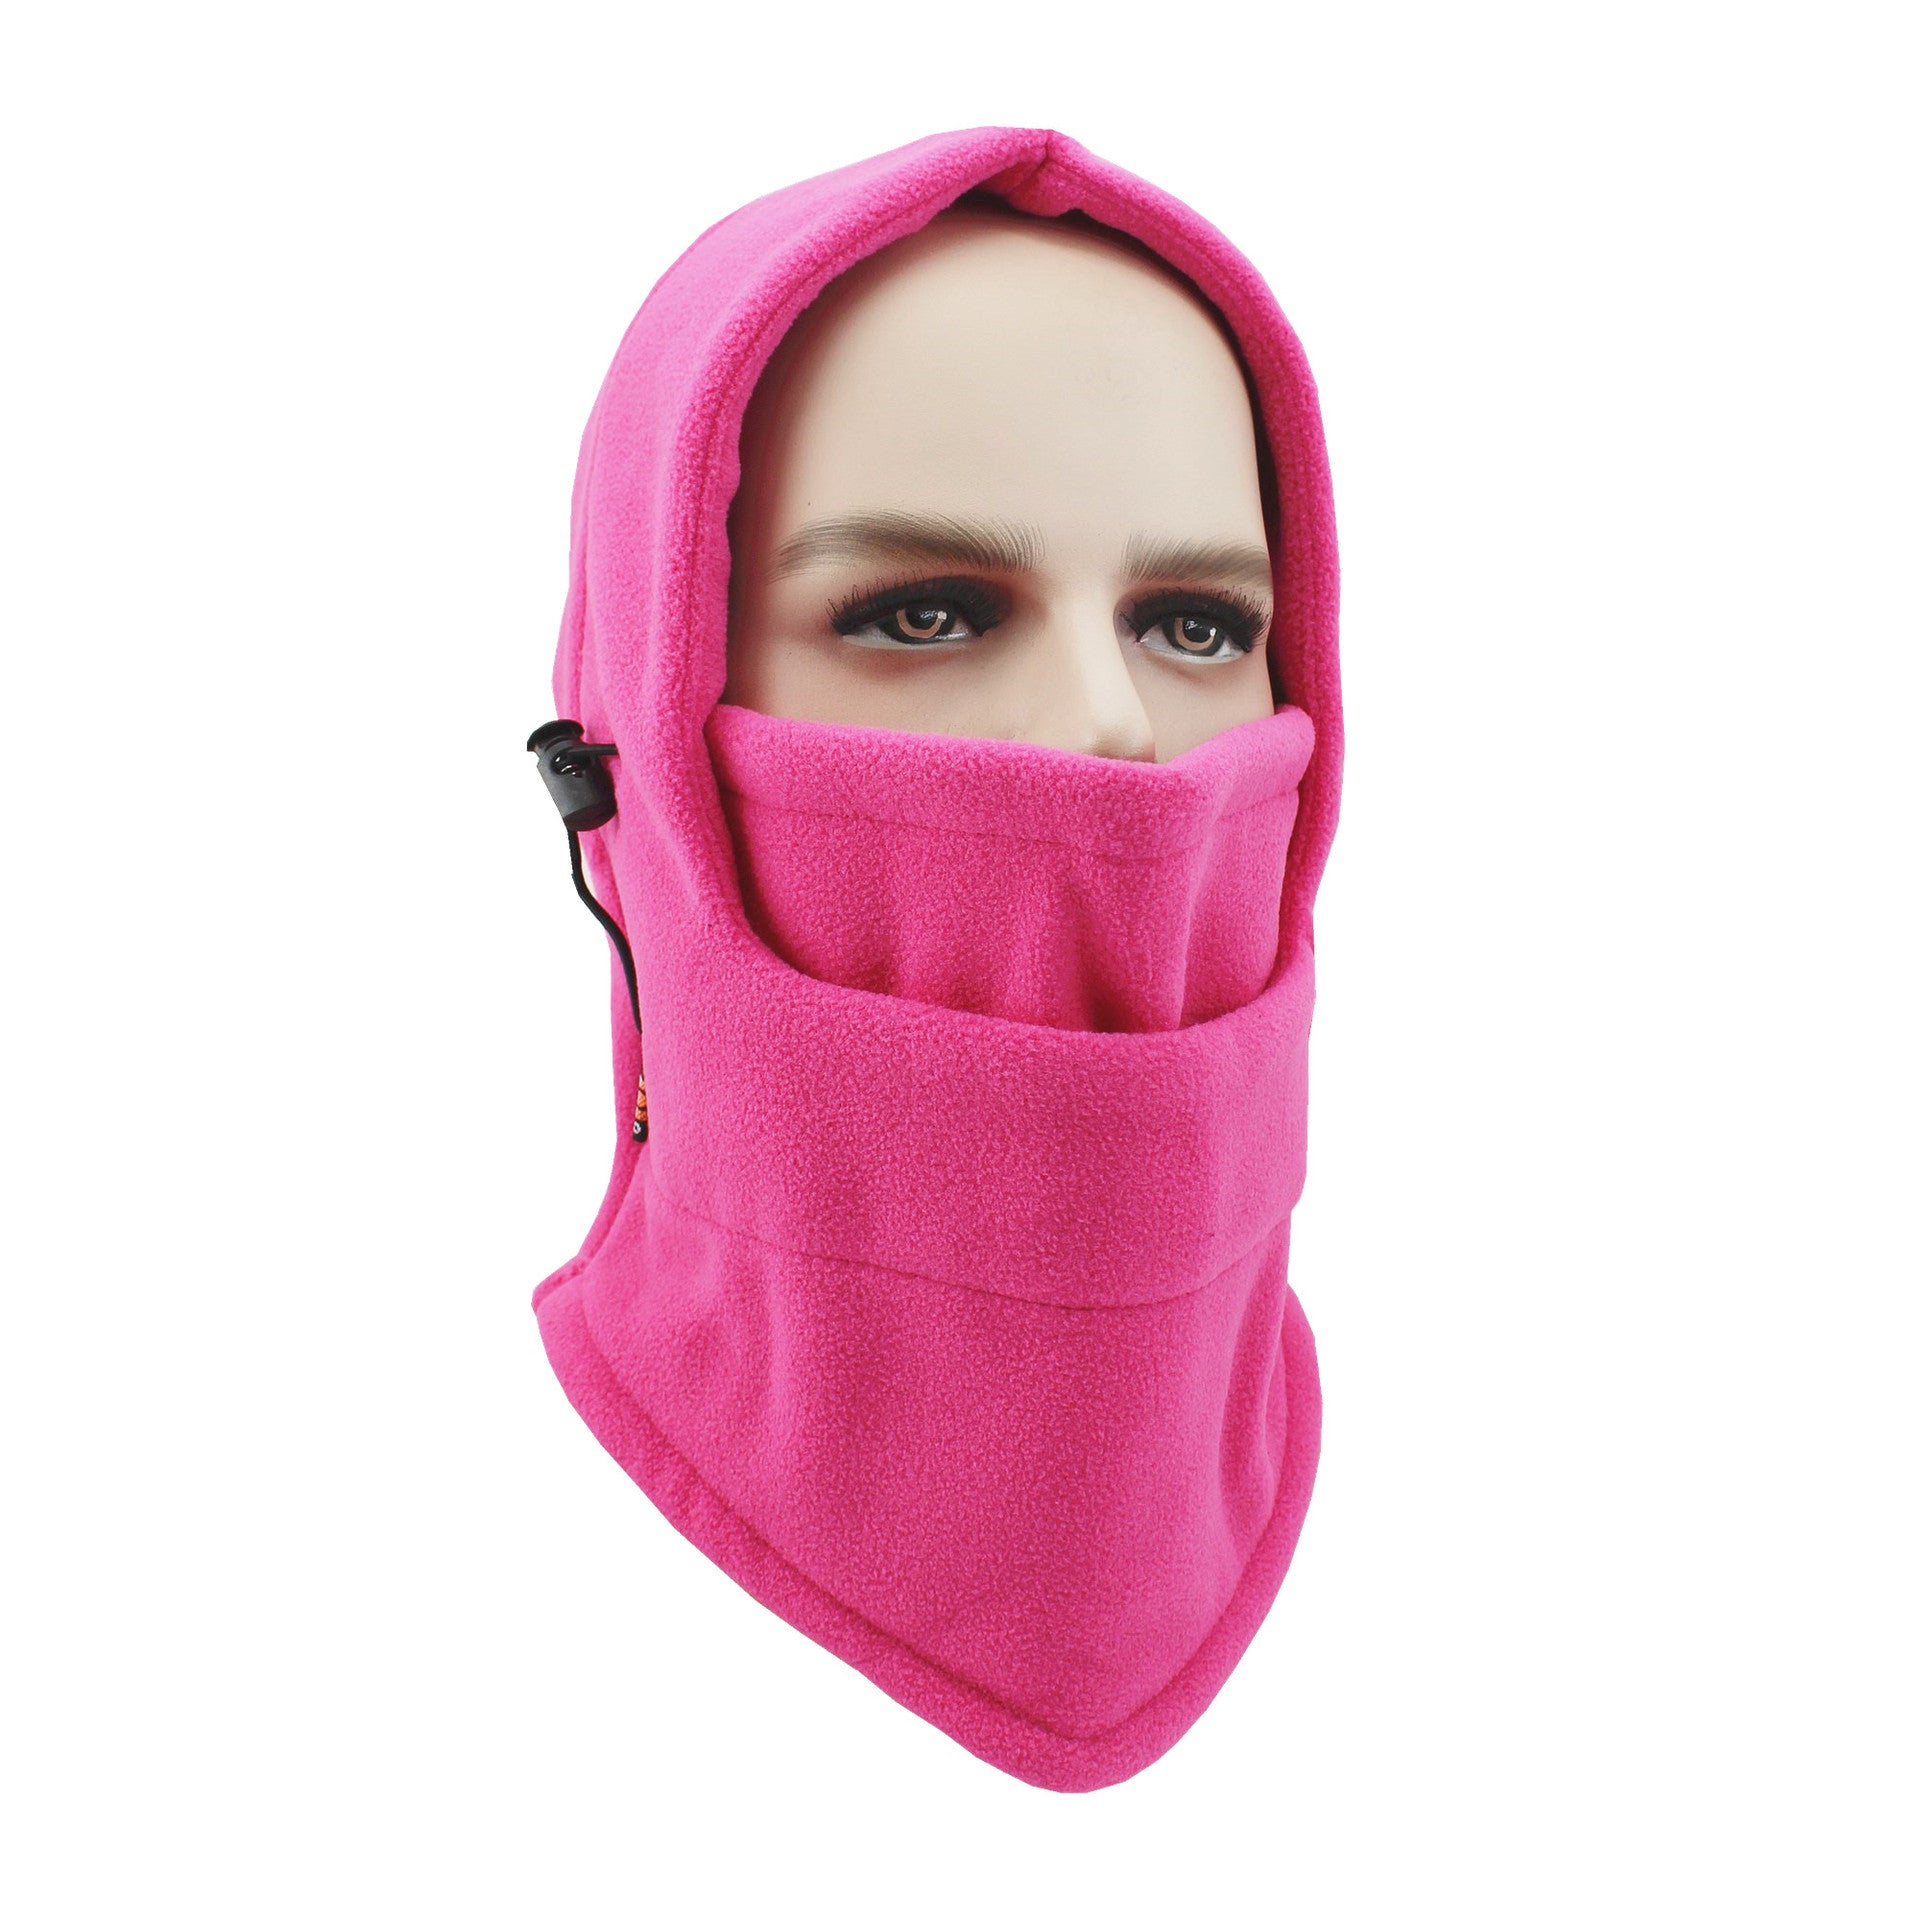 Multi-kinetic Energy Outdoor Scarf Mask In Winter - Hats -  Trend Goods